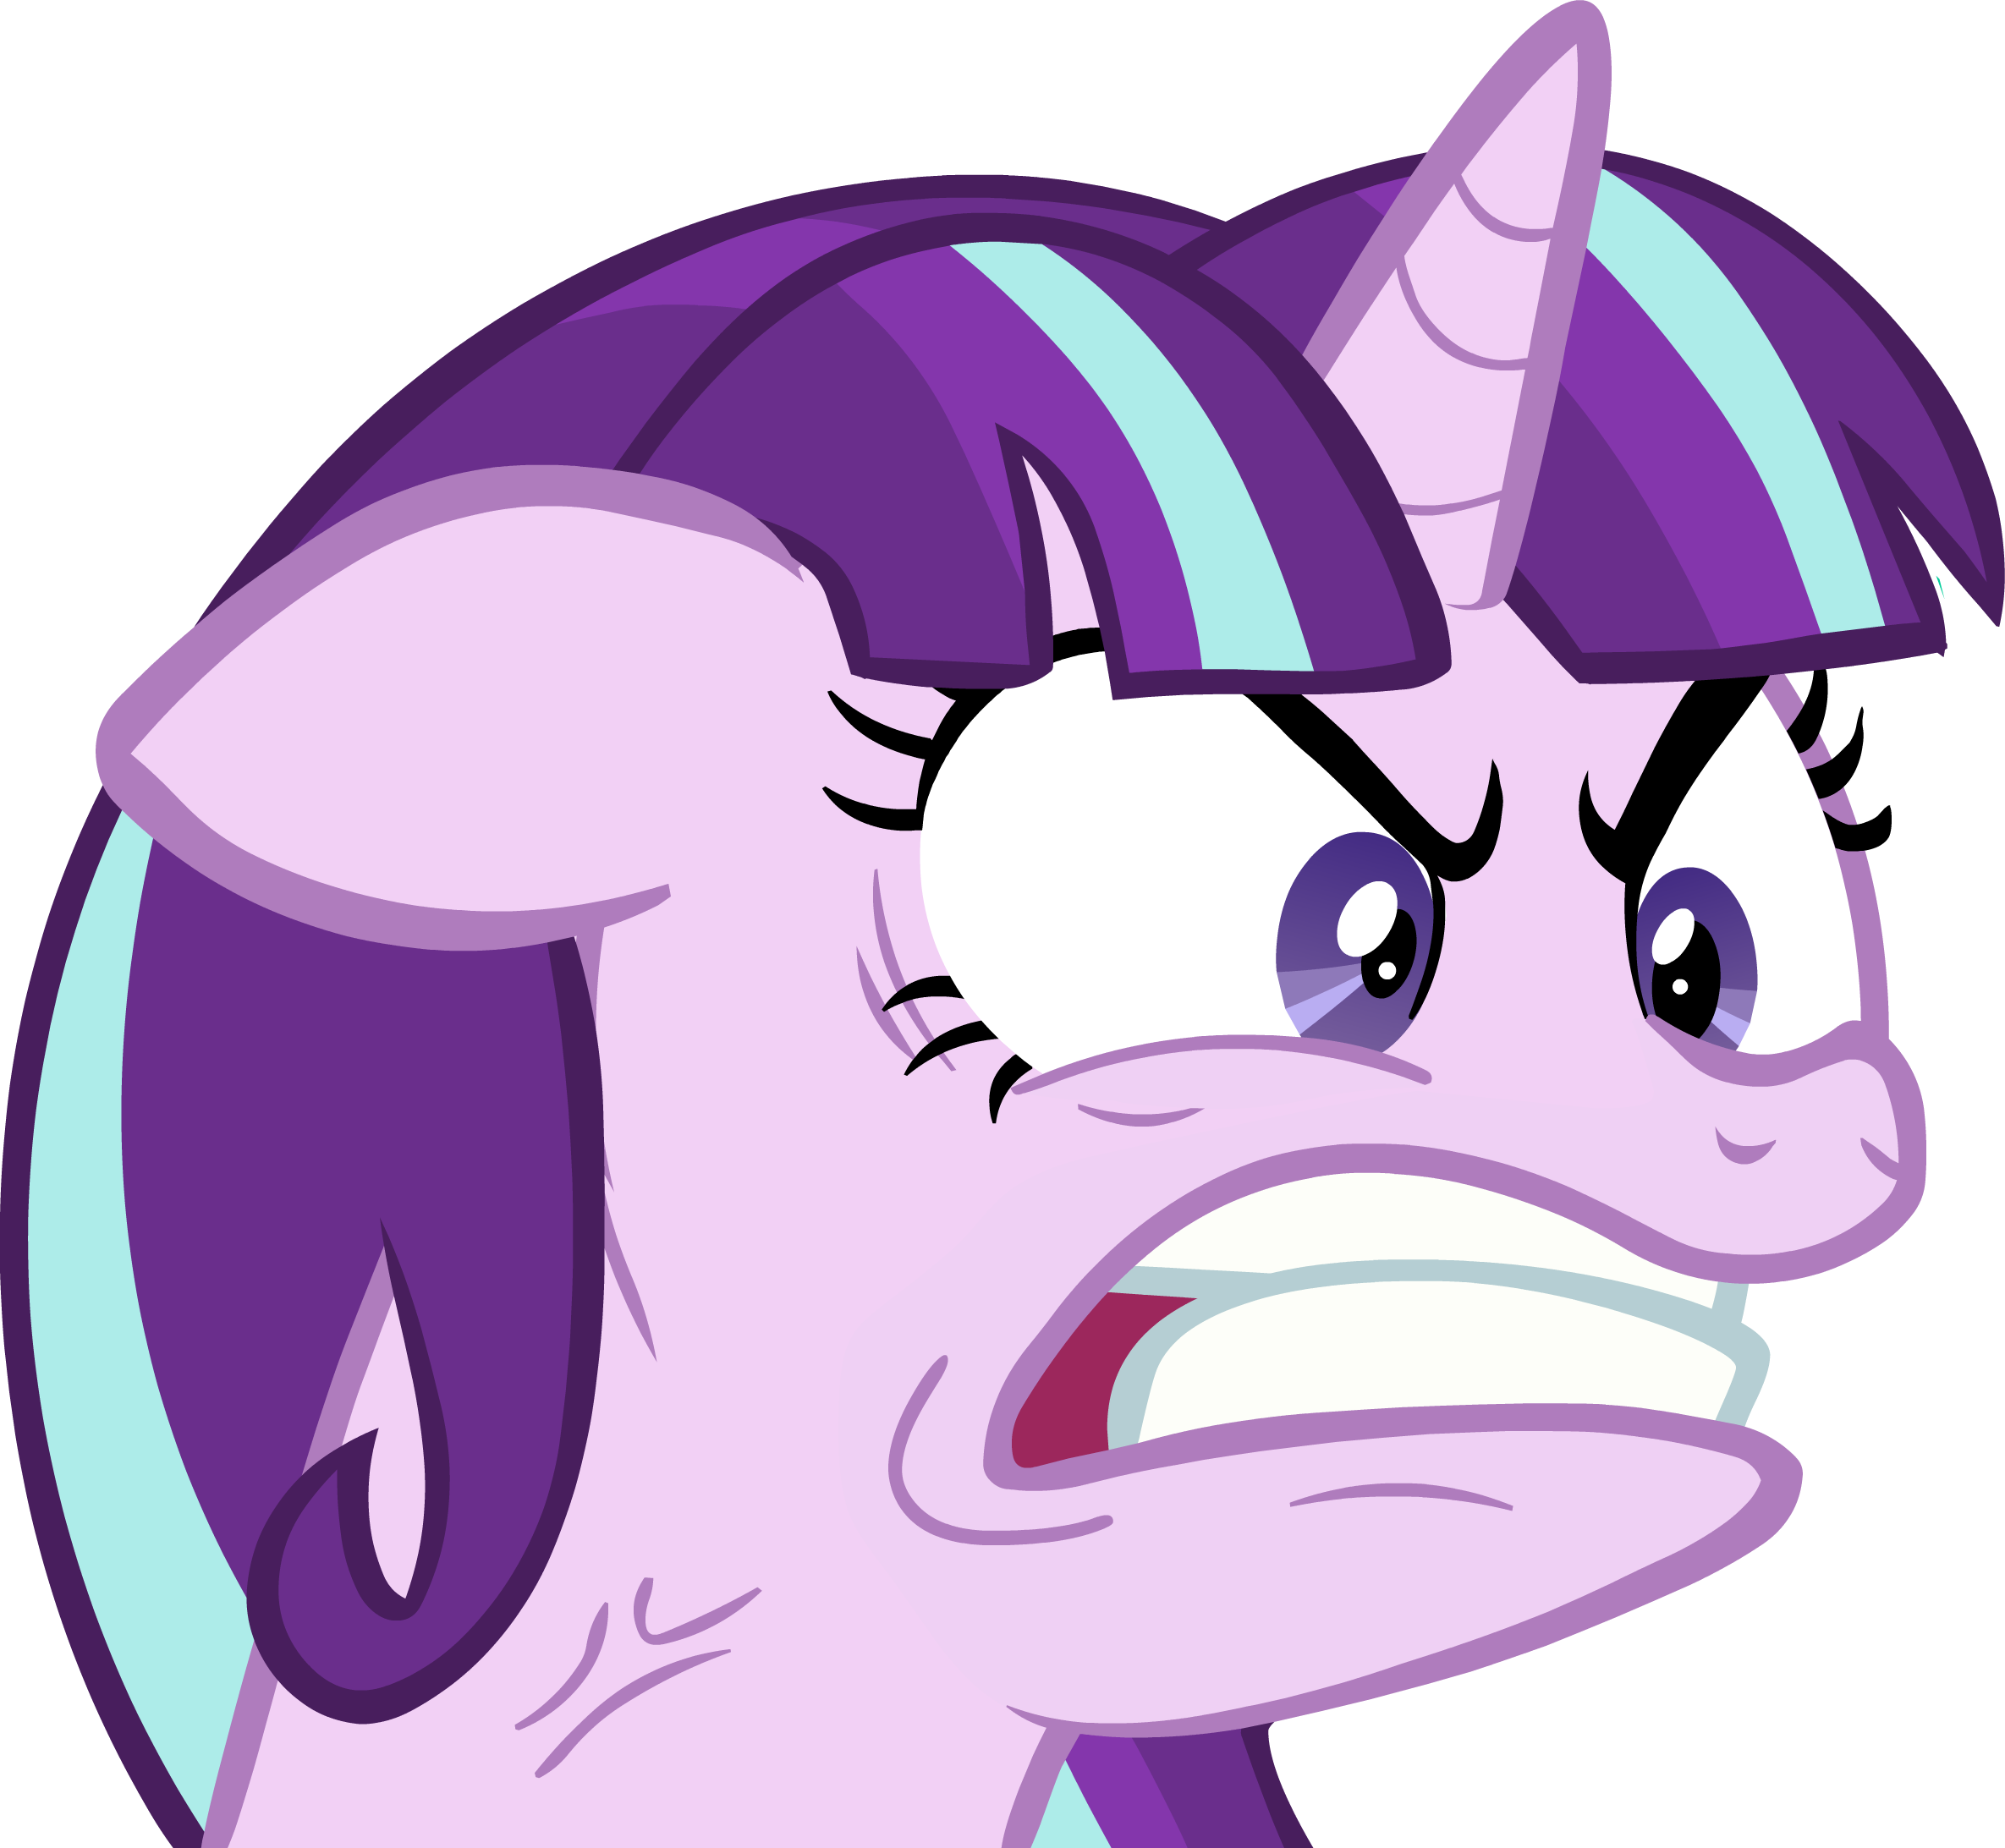 Starlight Glimmer - Extremely Angry Starlight Glimmer.